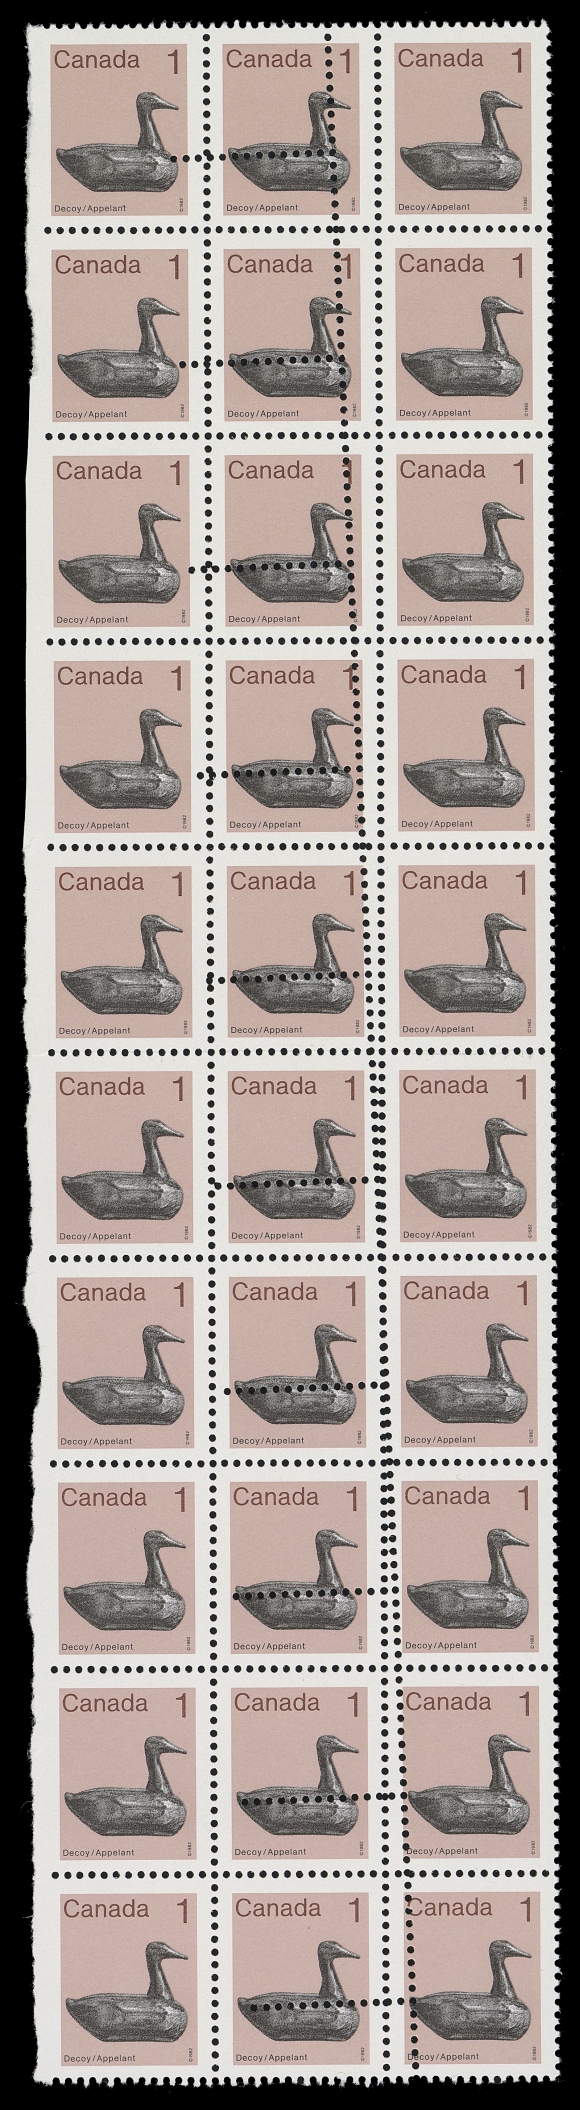 CANADA - 10 QUEEN ELIZABETH II  917iii variety,A visually striking mint block of thirty, part of margin at left irregularly severed, showing slanting double perforations mainly confined to stamps in second column, imperforate vertically between left margin and stamps in first column; a rarely seen large multiple showing the complete span of this unusual perforation error, VF NH